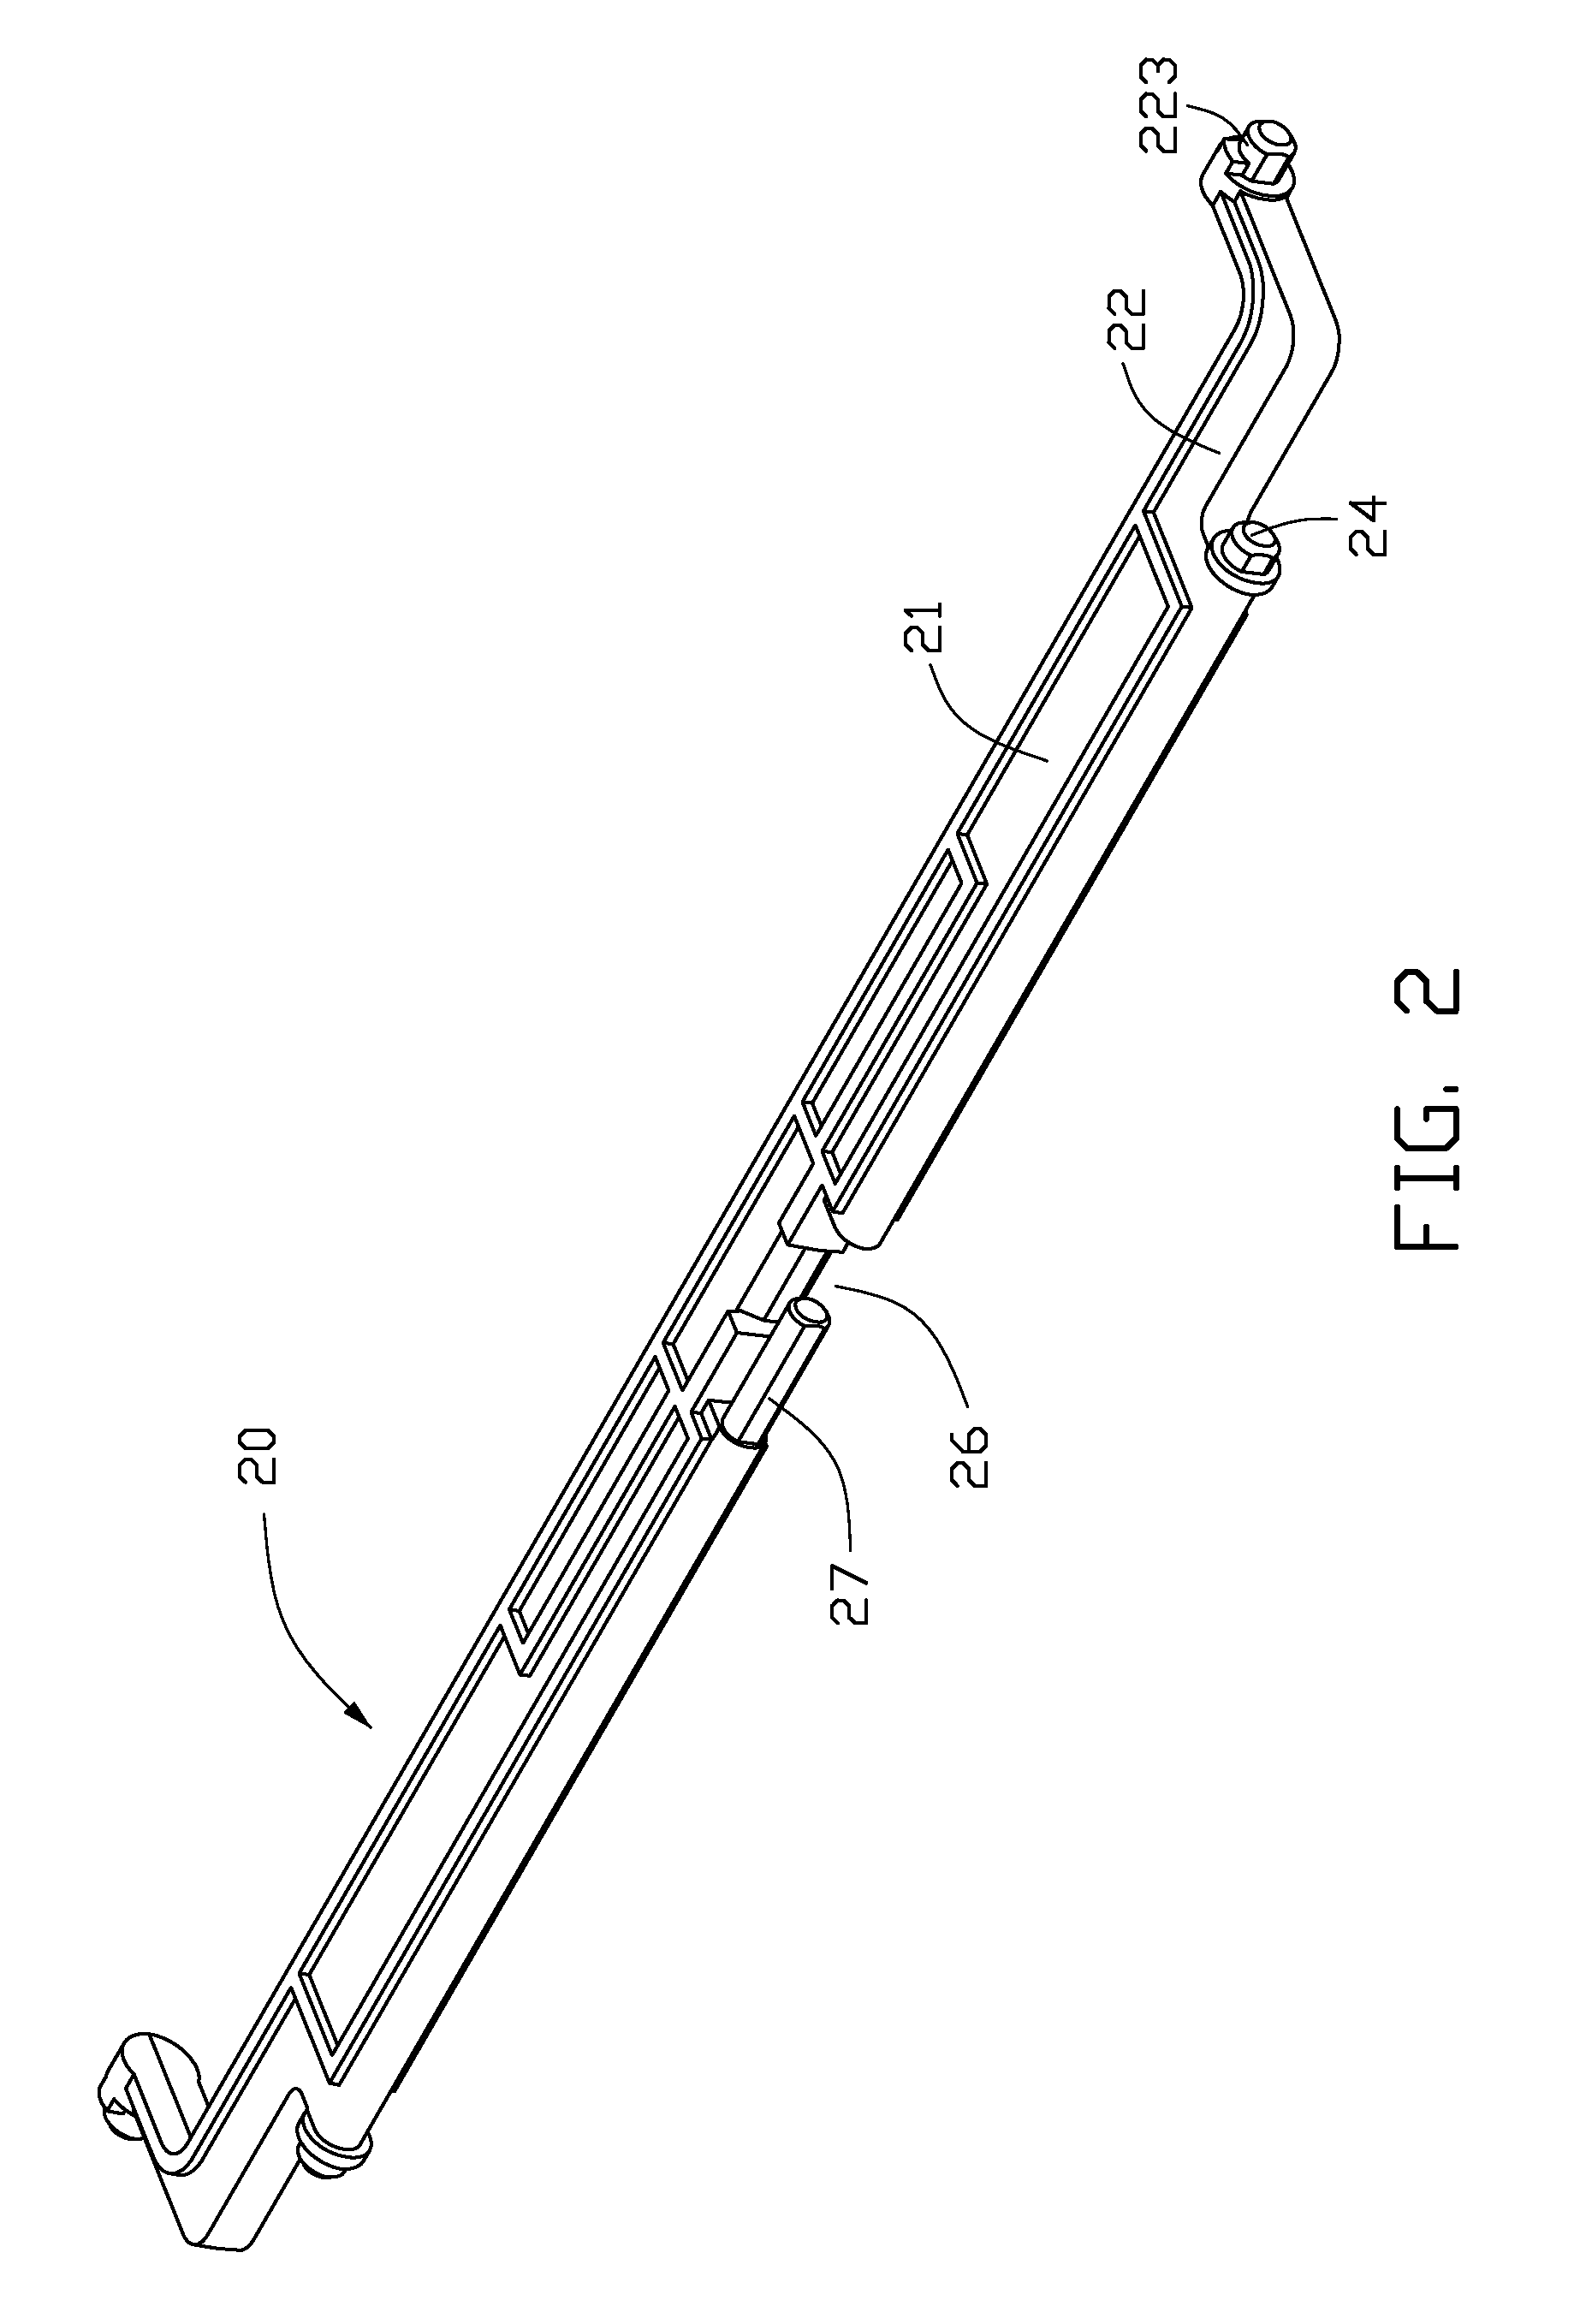 Cover assembly for storage device